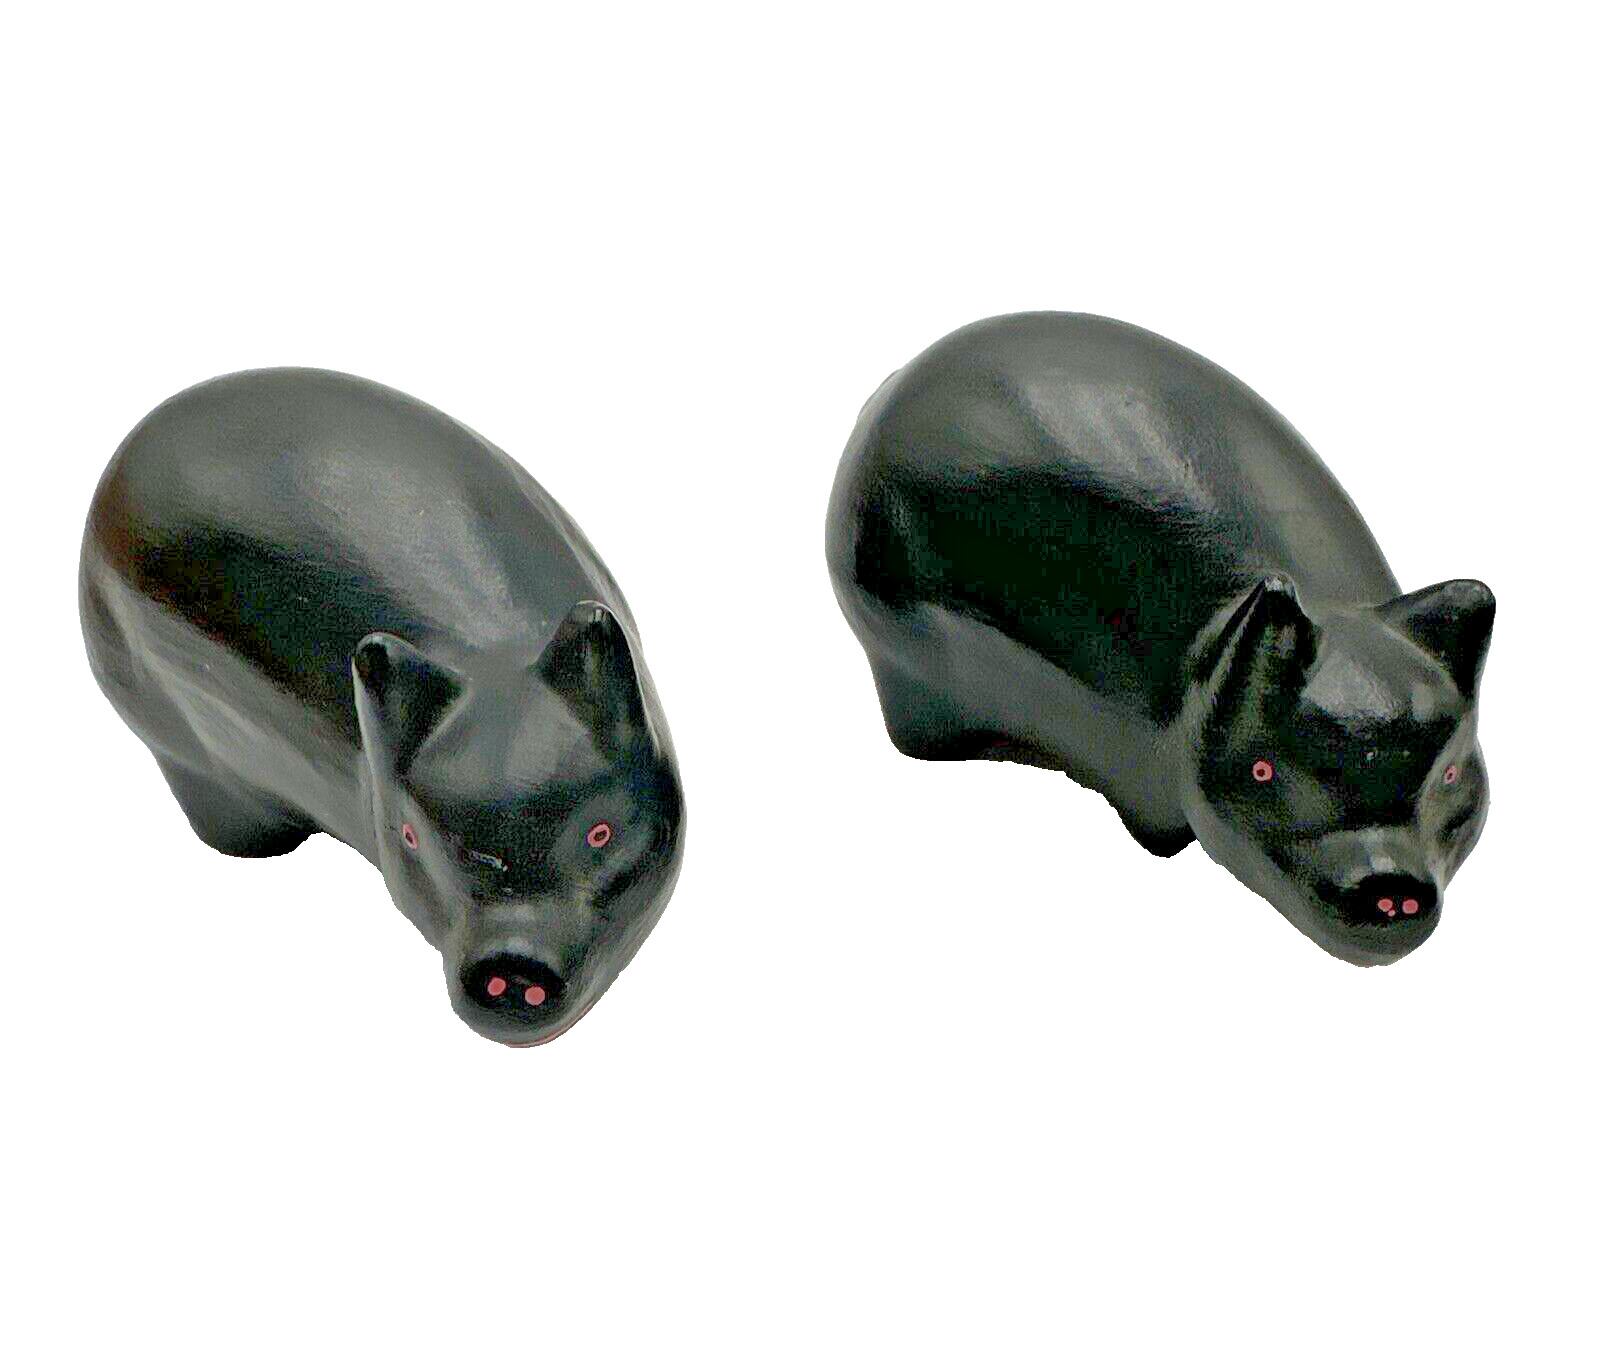 Rare MCM lot- 2 Black Pigs Hand Carved Wooden Anatomically Correct Pigs Figurine